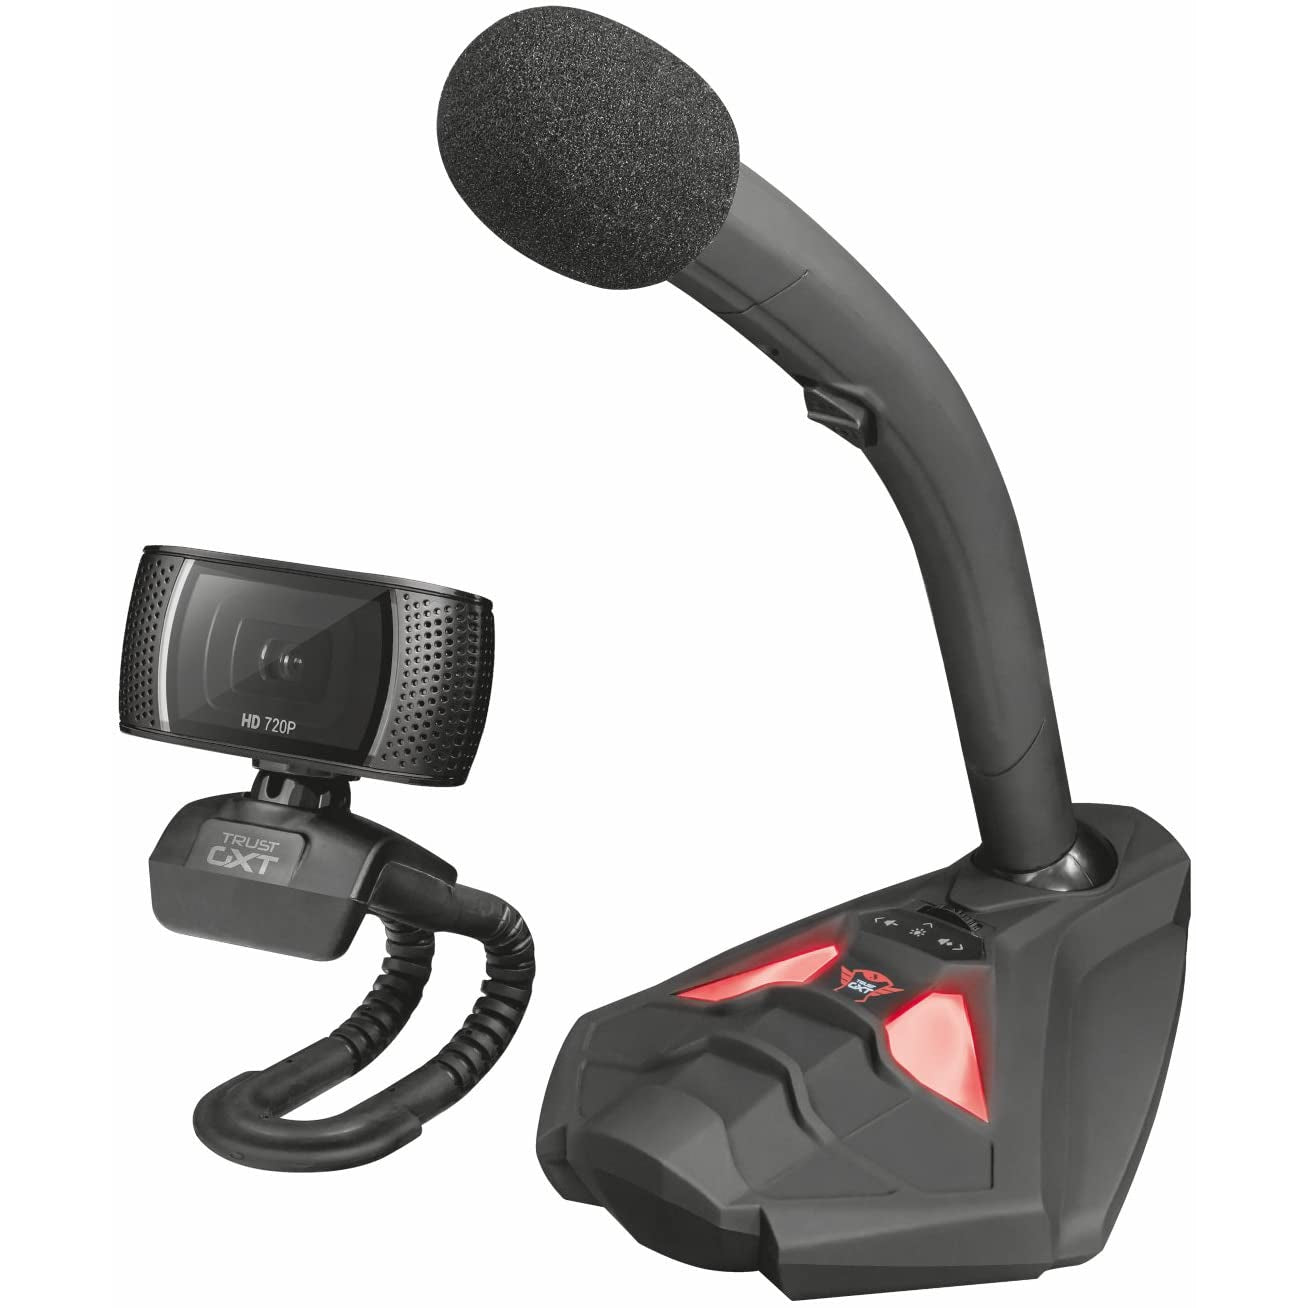 Trust Gaming Reyno Streaming Pack in Black and Red, USB Microphone and Webcam